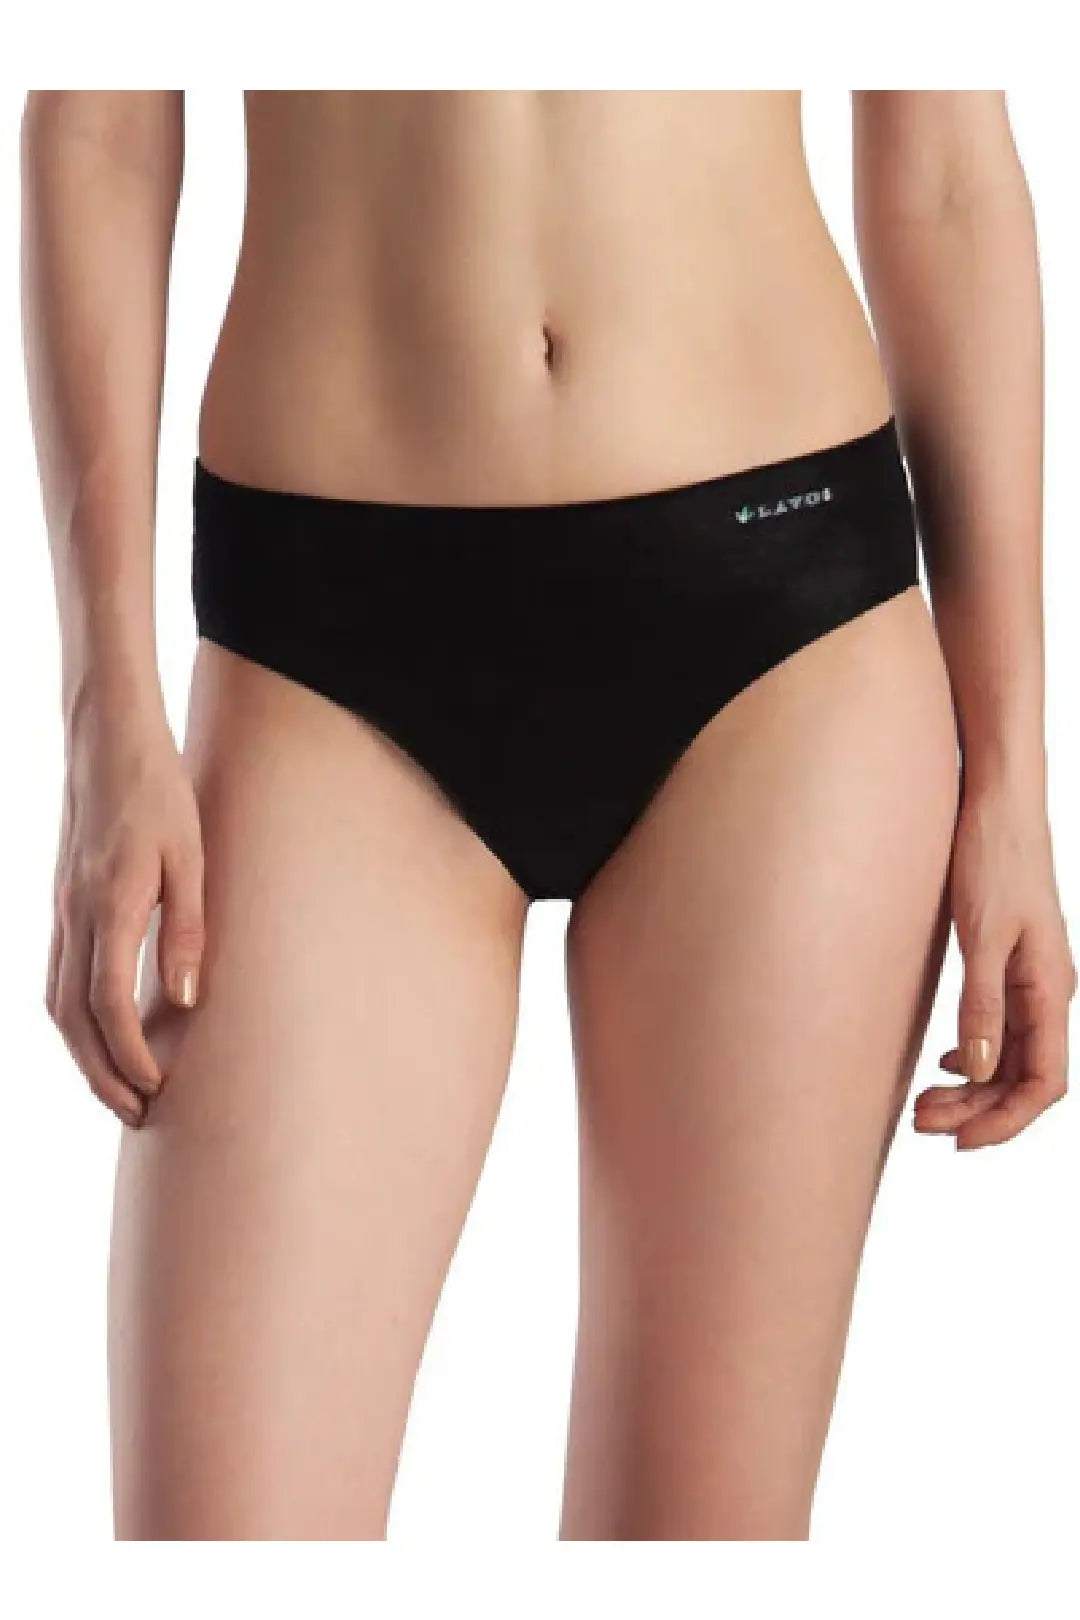 Organic Bamboo No Marks Panty for Women - Invisible Seamless Panties | Seamless No line Panty without lines